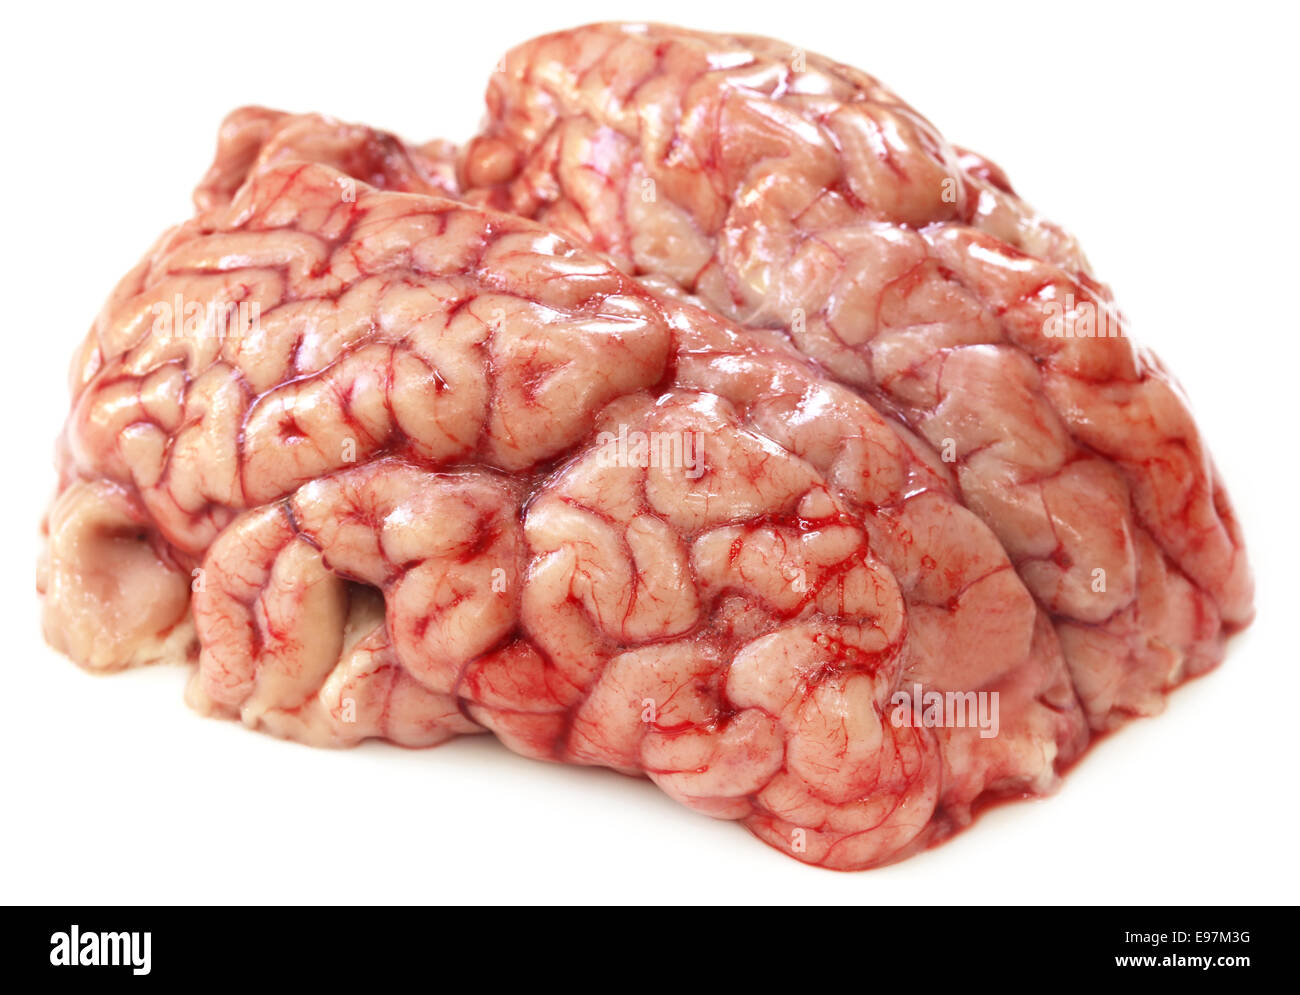 Brain of a cow over white background Stock Photo